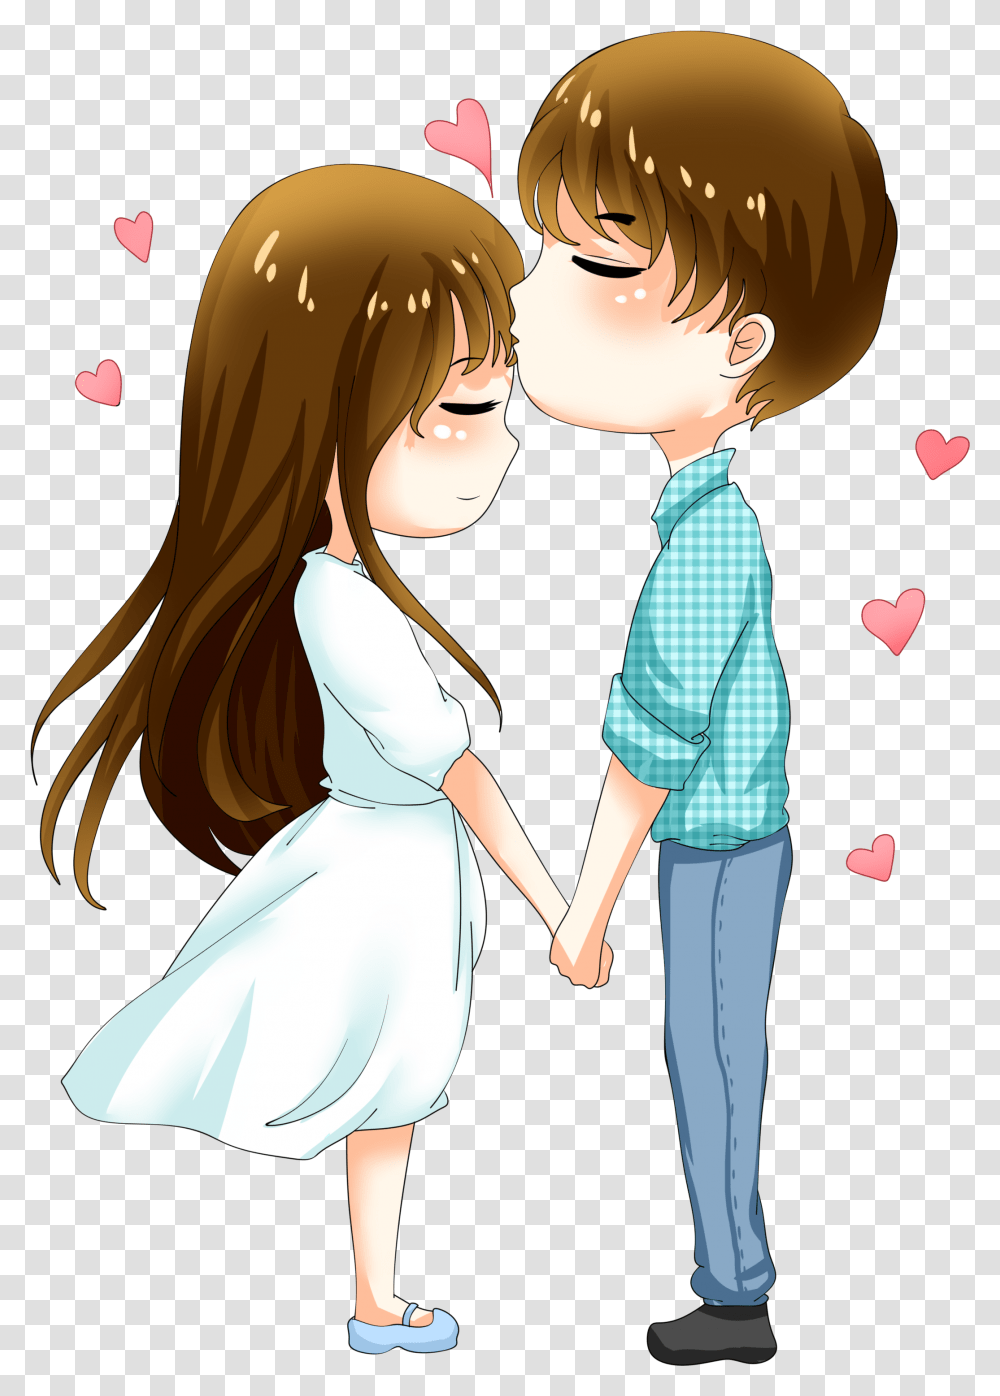 Couple Hd Cartoon Couple Forehead Kiss, Person, Hand, Holding Hands, Dating Transparent Png